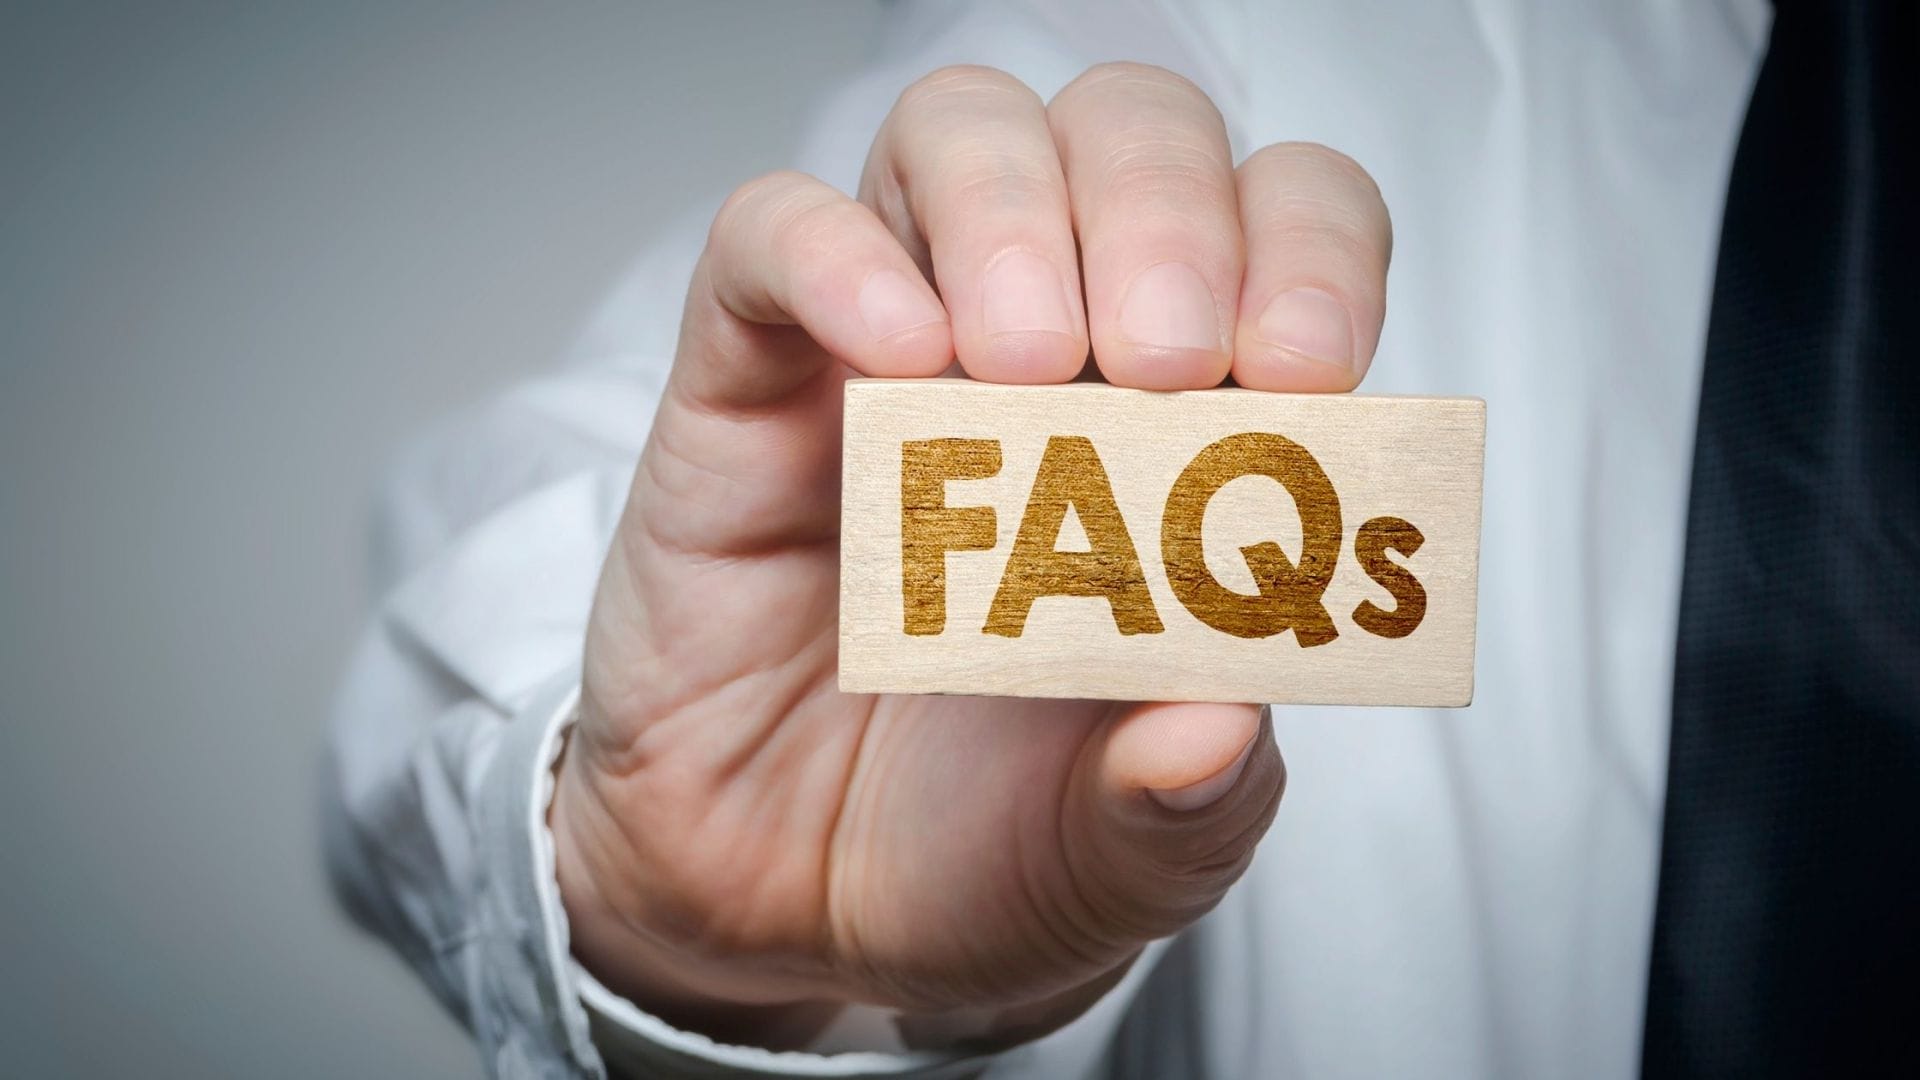 A person in business attire holding a wooden block with 'FAQs' inscribed on it, symbolizing frequently asked questions regarding the management of skin cancer treatment expenses.